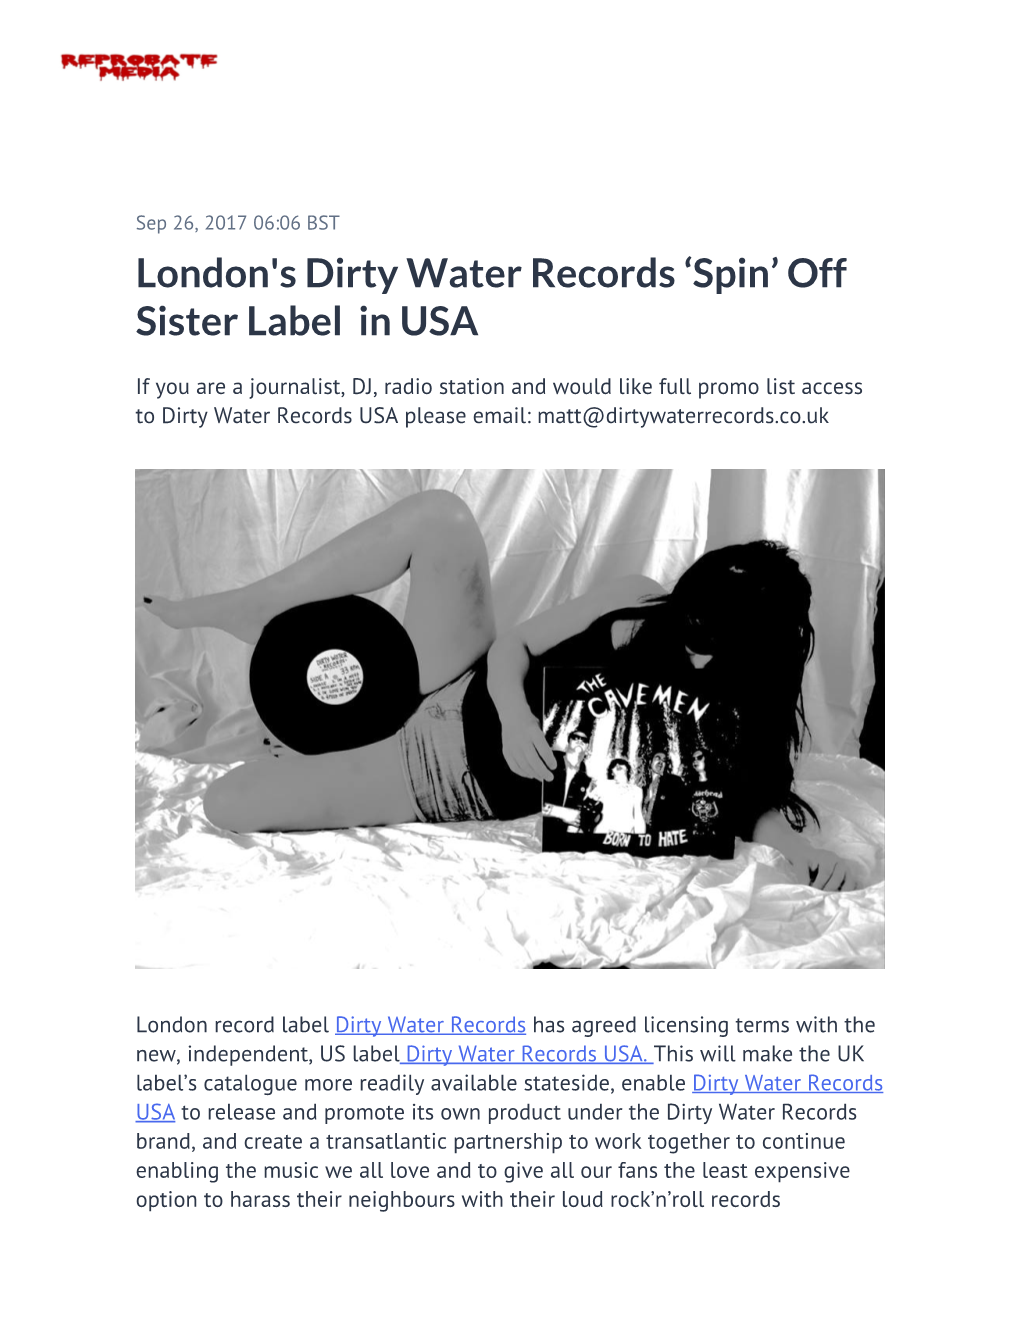 London's Dirty Water Records 'Spin' Off Sister Label